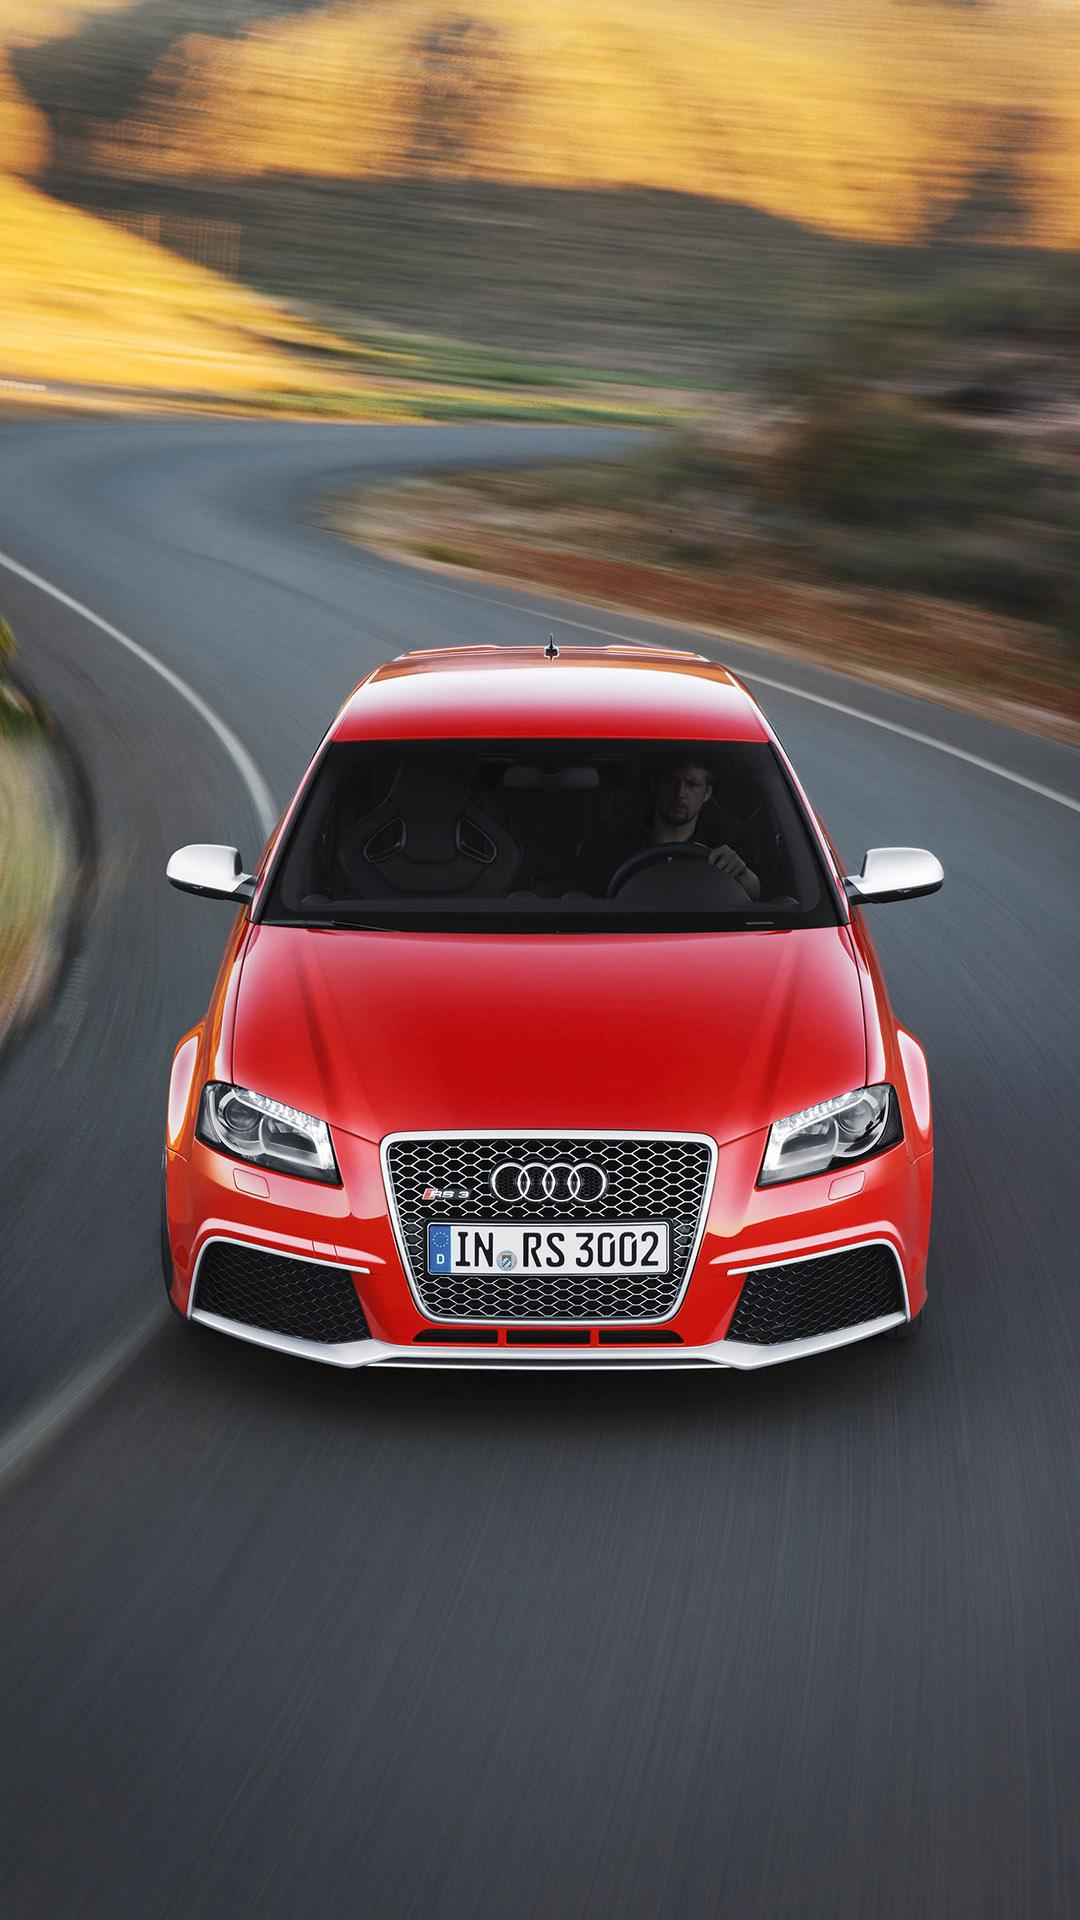 Audi RS 3 sportbackK wallpaper, free and easy to download